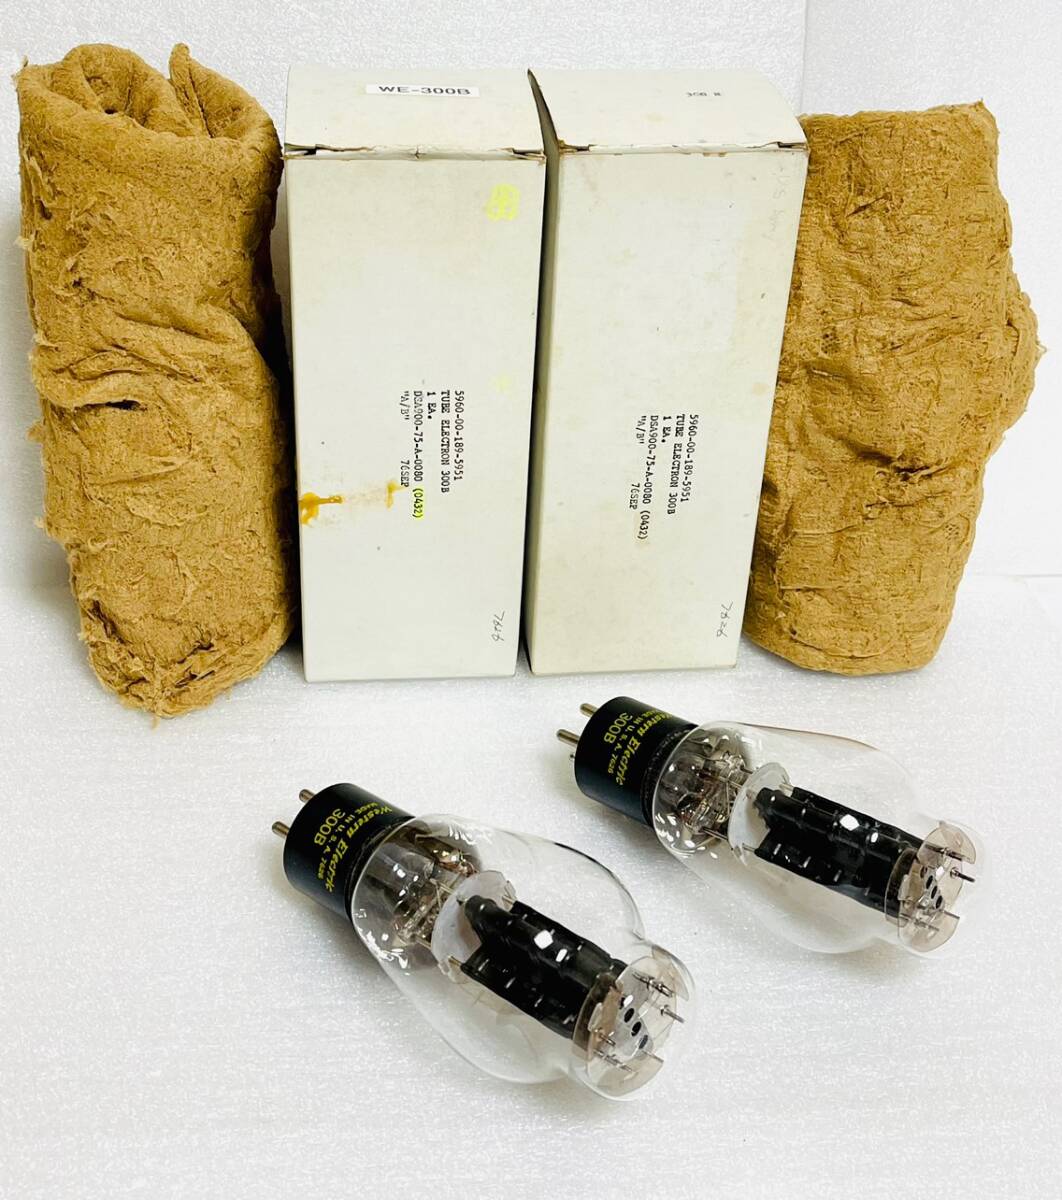 Western Electric Western electric 300B vacuum tube 2 ps. original box attaching. operation excellent ..[ rare ]